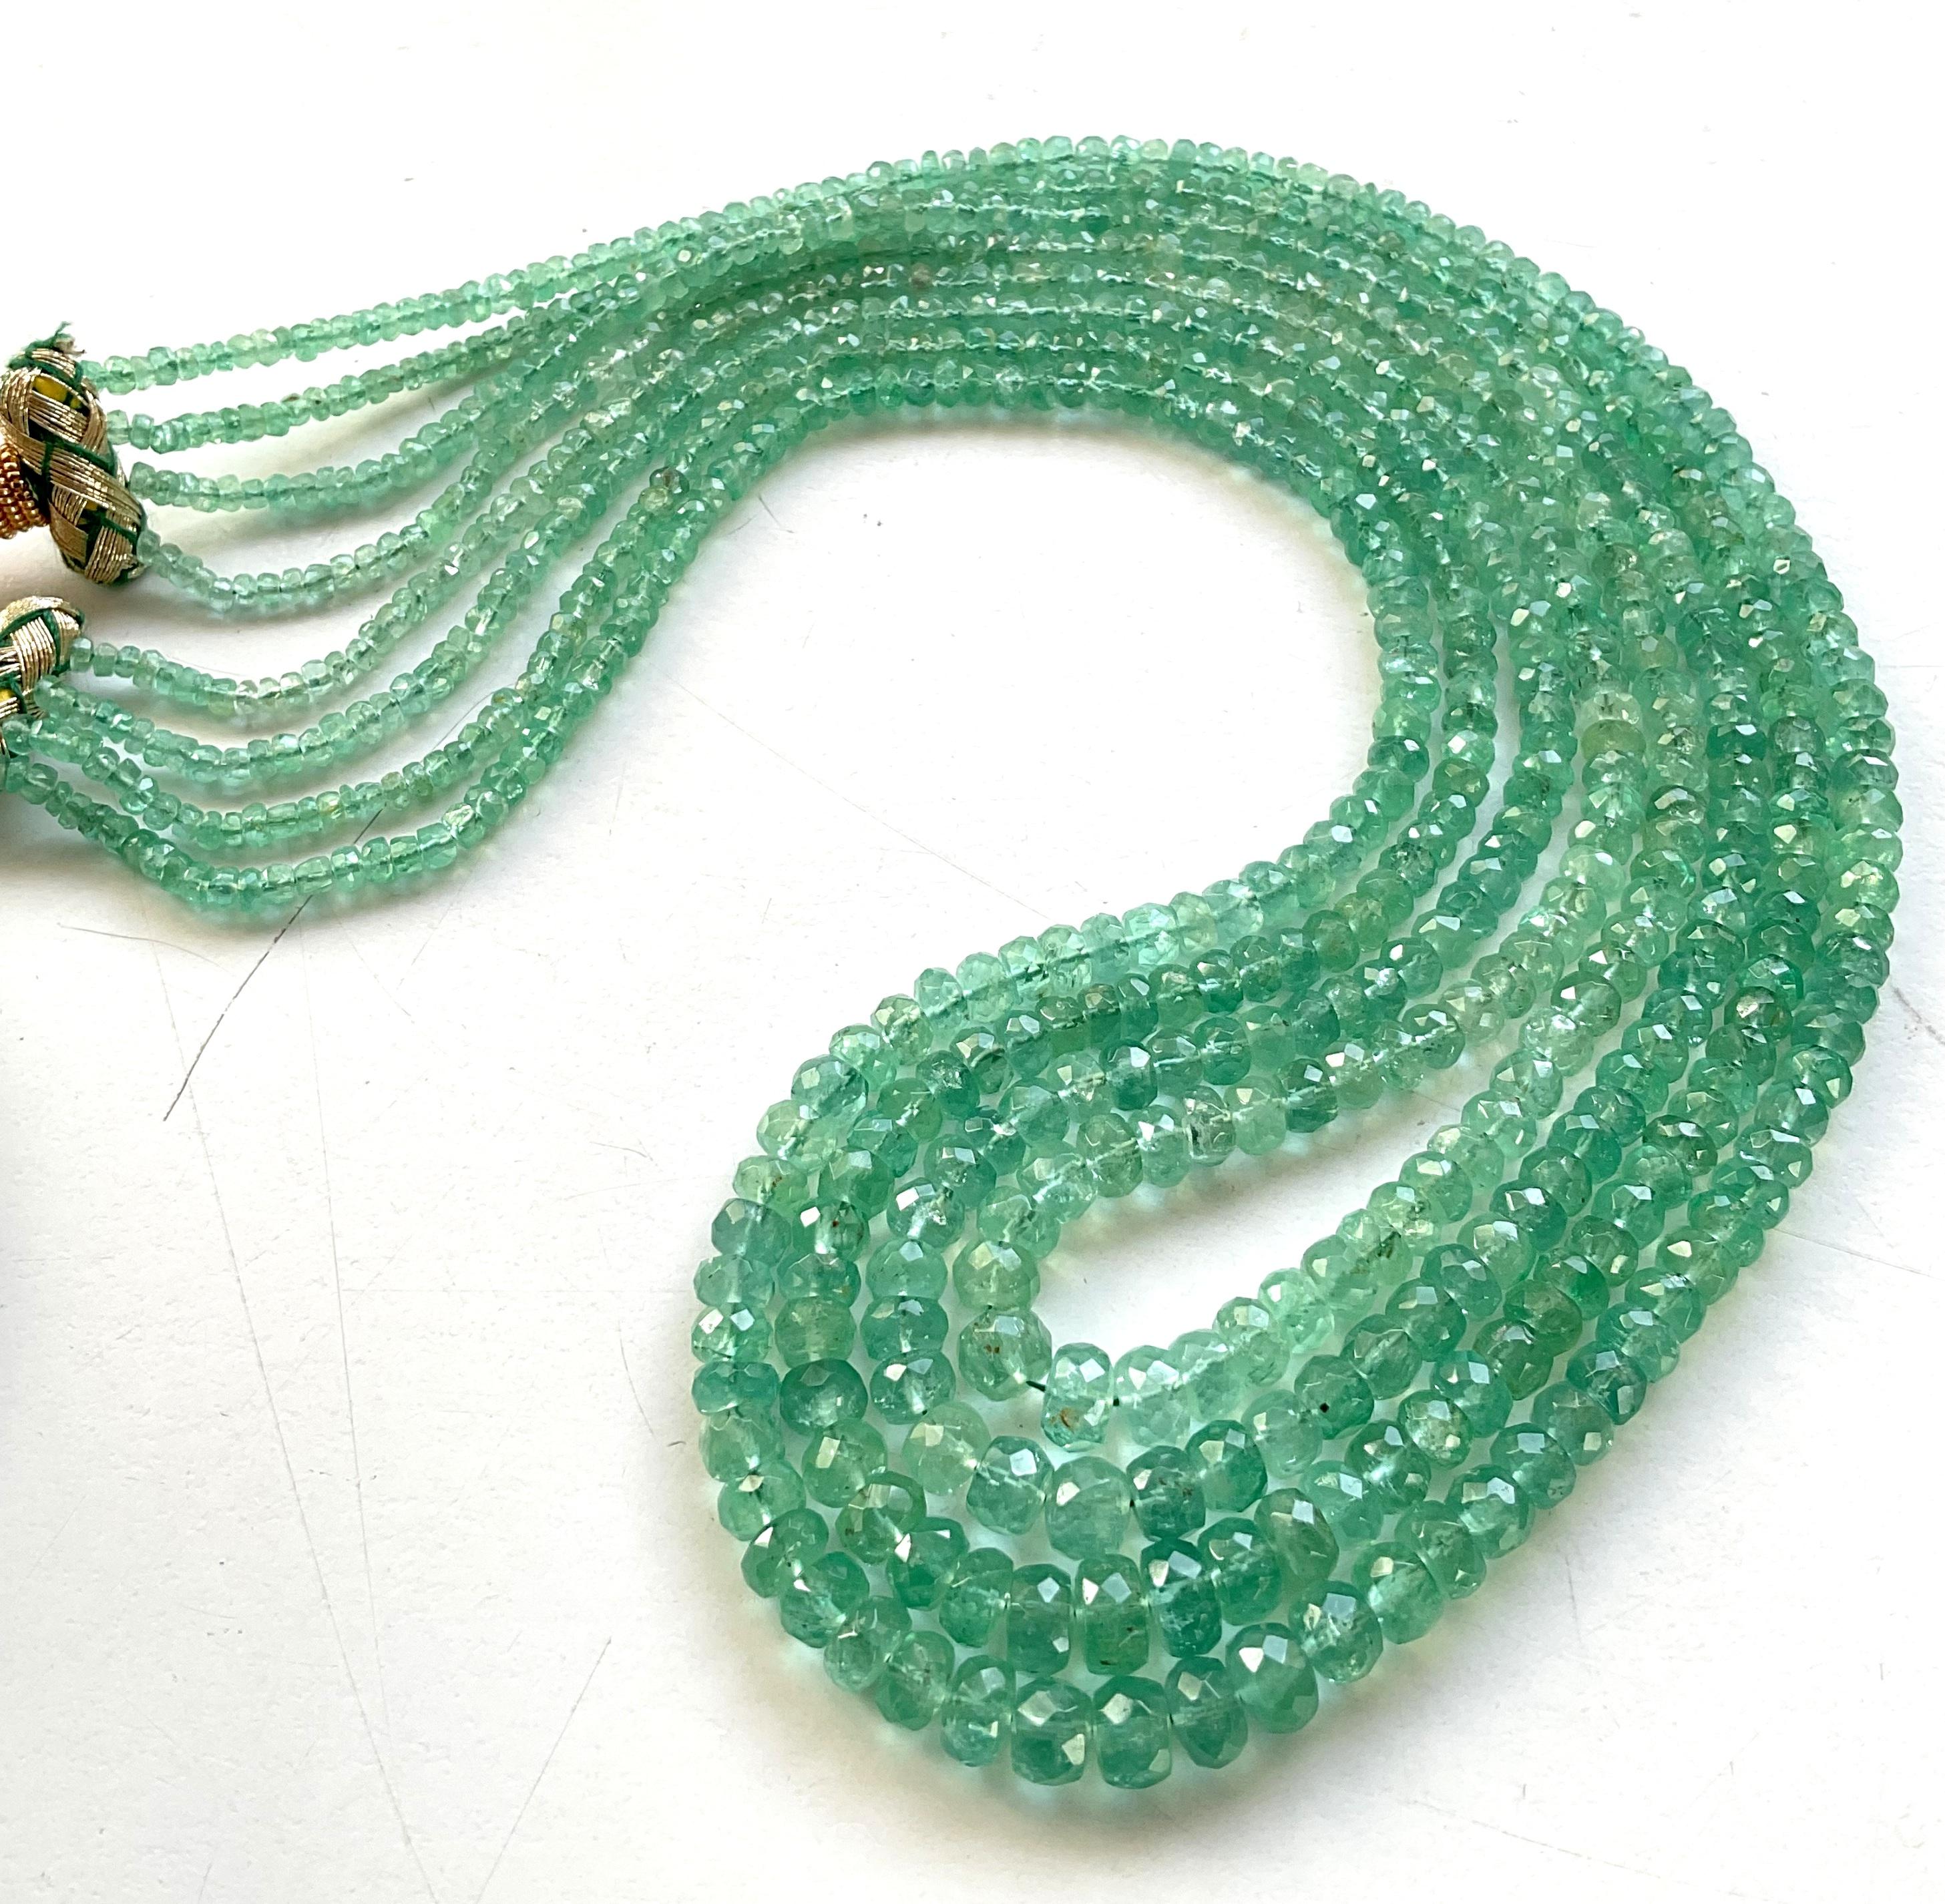 198.40 Carats Panjshir Emerald Faceted Beads For Fine Jewelry Natural Gemstone
Gemstone - Emerald
Weight - 198.40 carats
Shape - Beads
Size - 2 To 6 MM
Quantity - 4 line